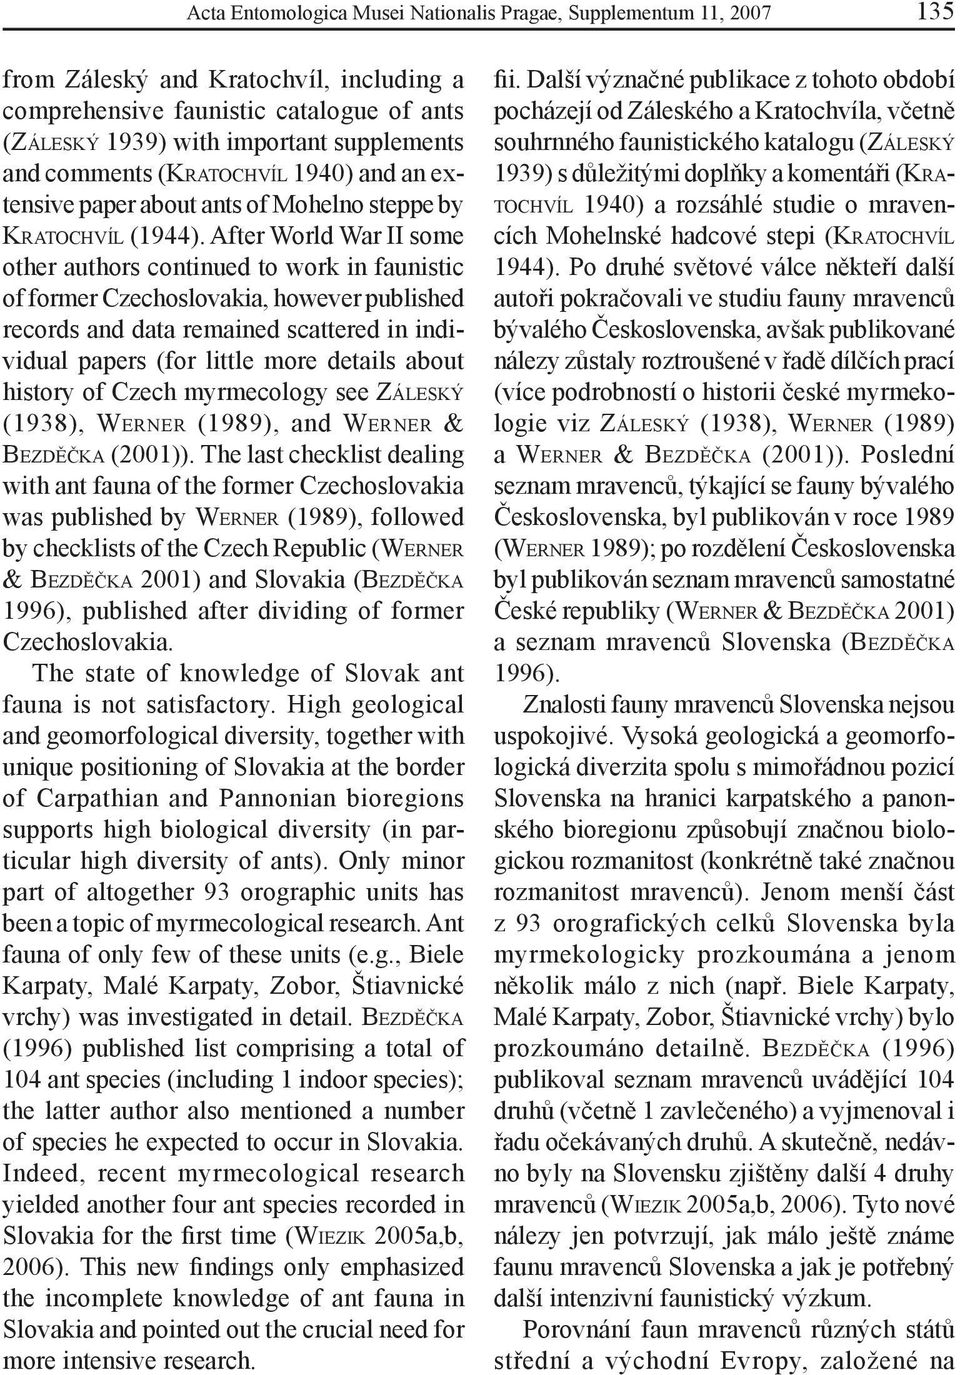 After World War II some other authors continued to work in faunistic of former Czechoslovakia, however published records and data remained scattered in individual papers (for little more details